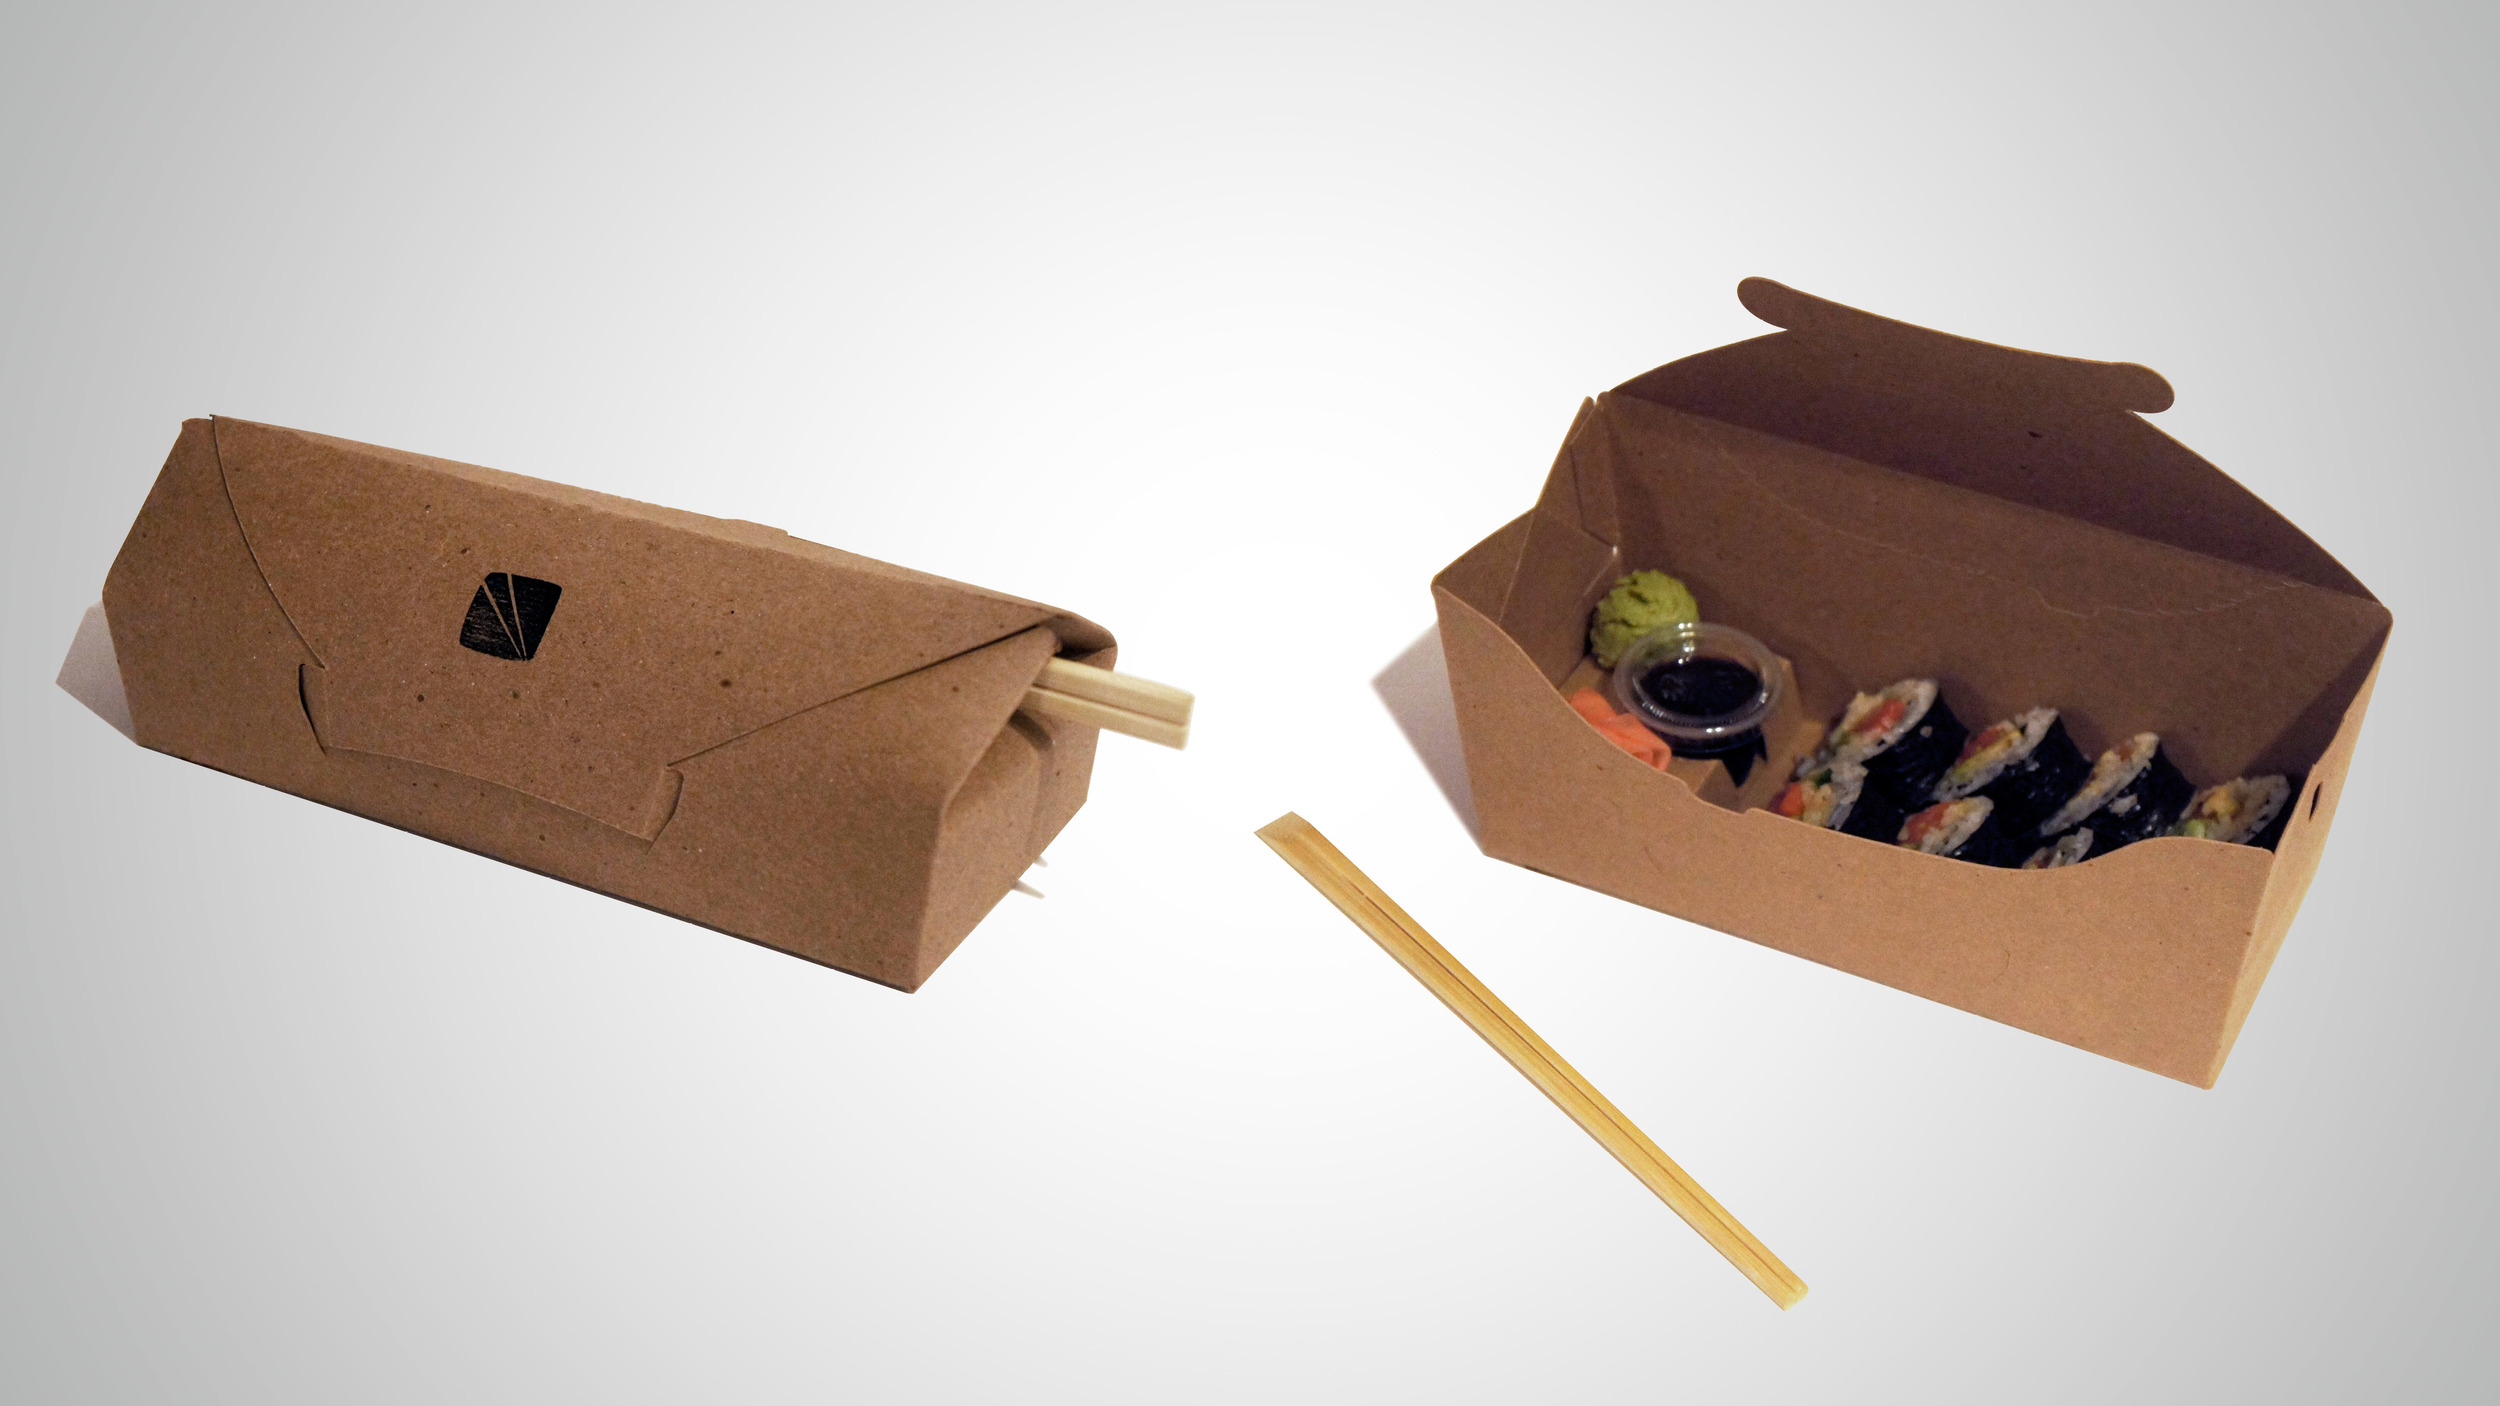  Resealable lid. Internal chopstick storage. Pop-up tray secures soy sauce and elevates wasabi and ginger. 